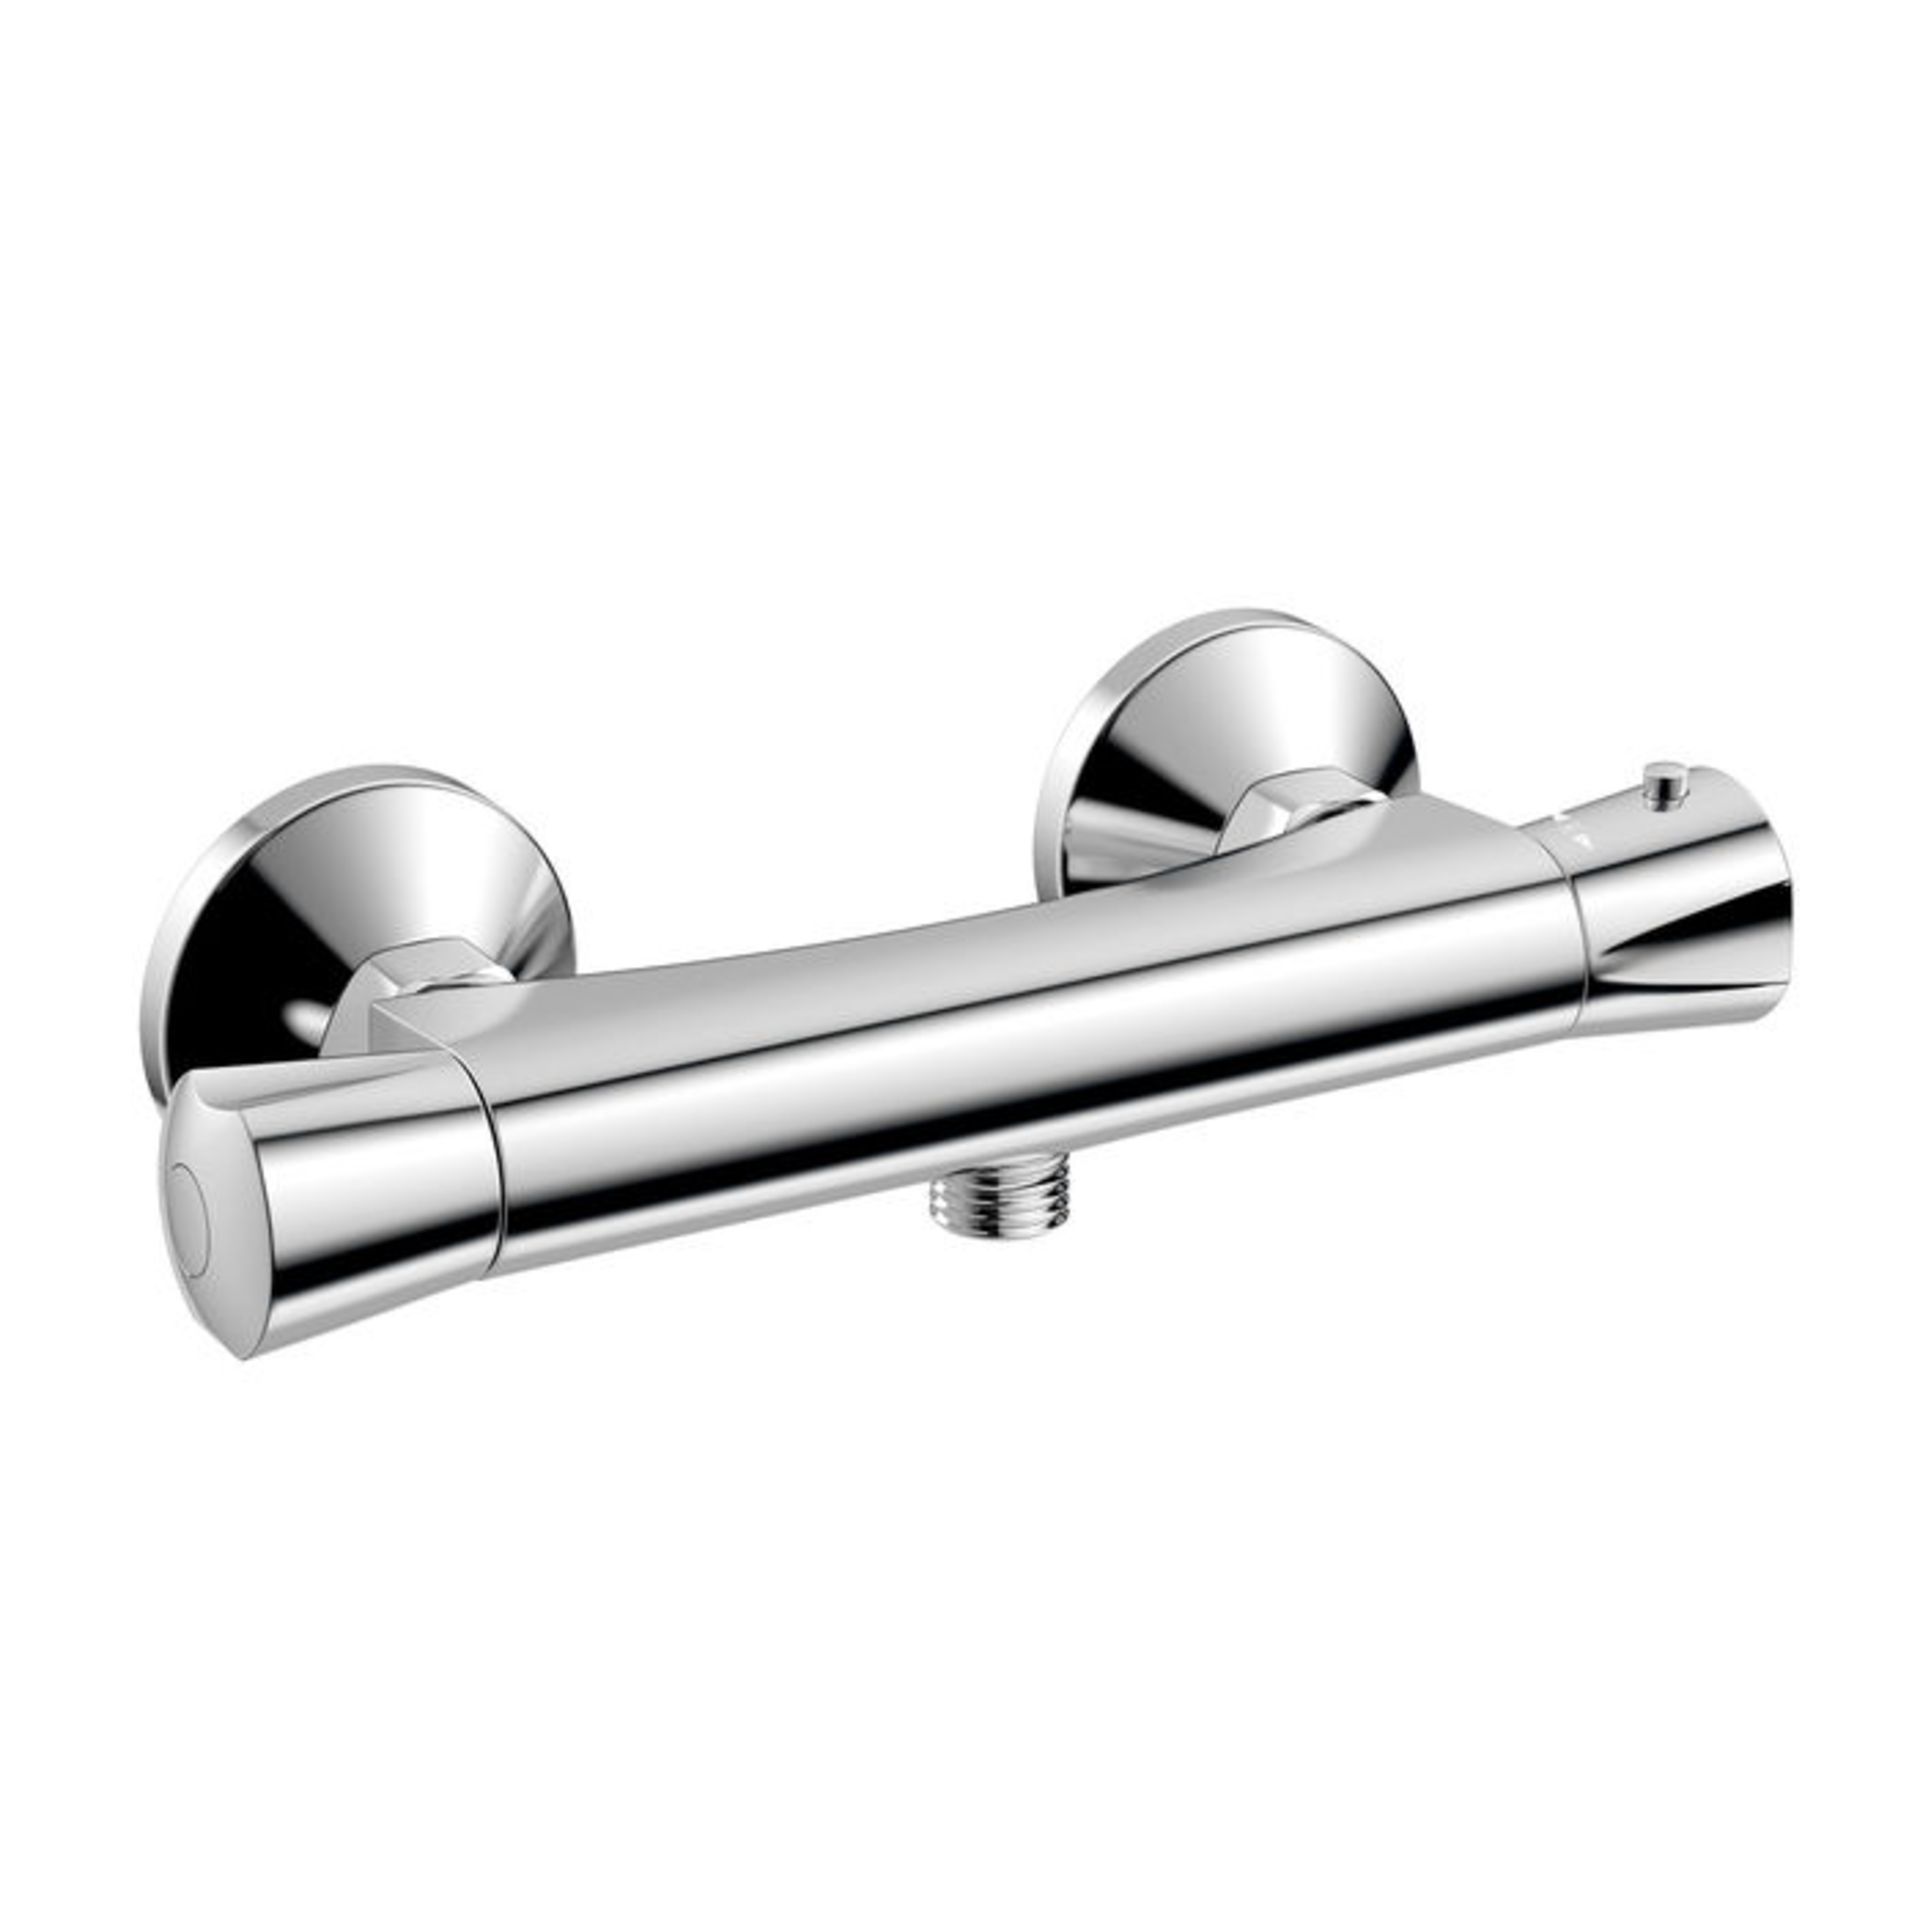 (P46) Thermostatic Shower Valve - Round Bar Mixer Chrome plated solid brass mixer Cool to Touch - Image 2 of 2